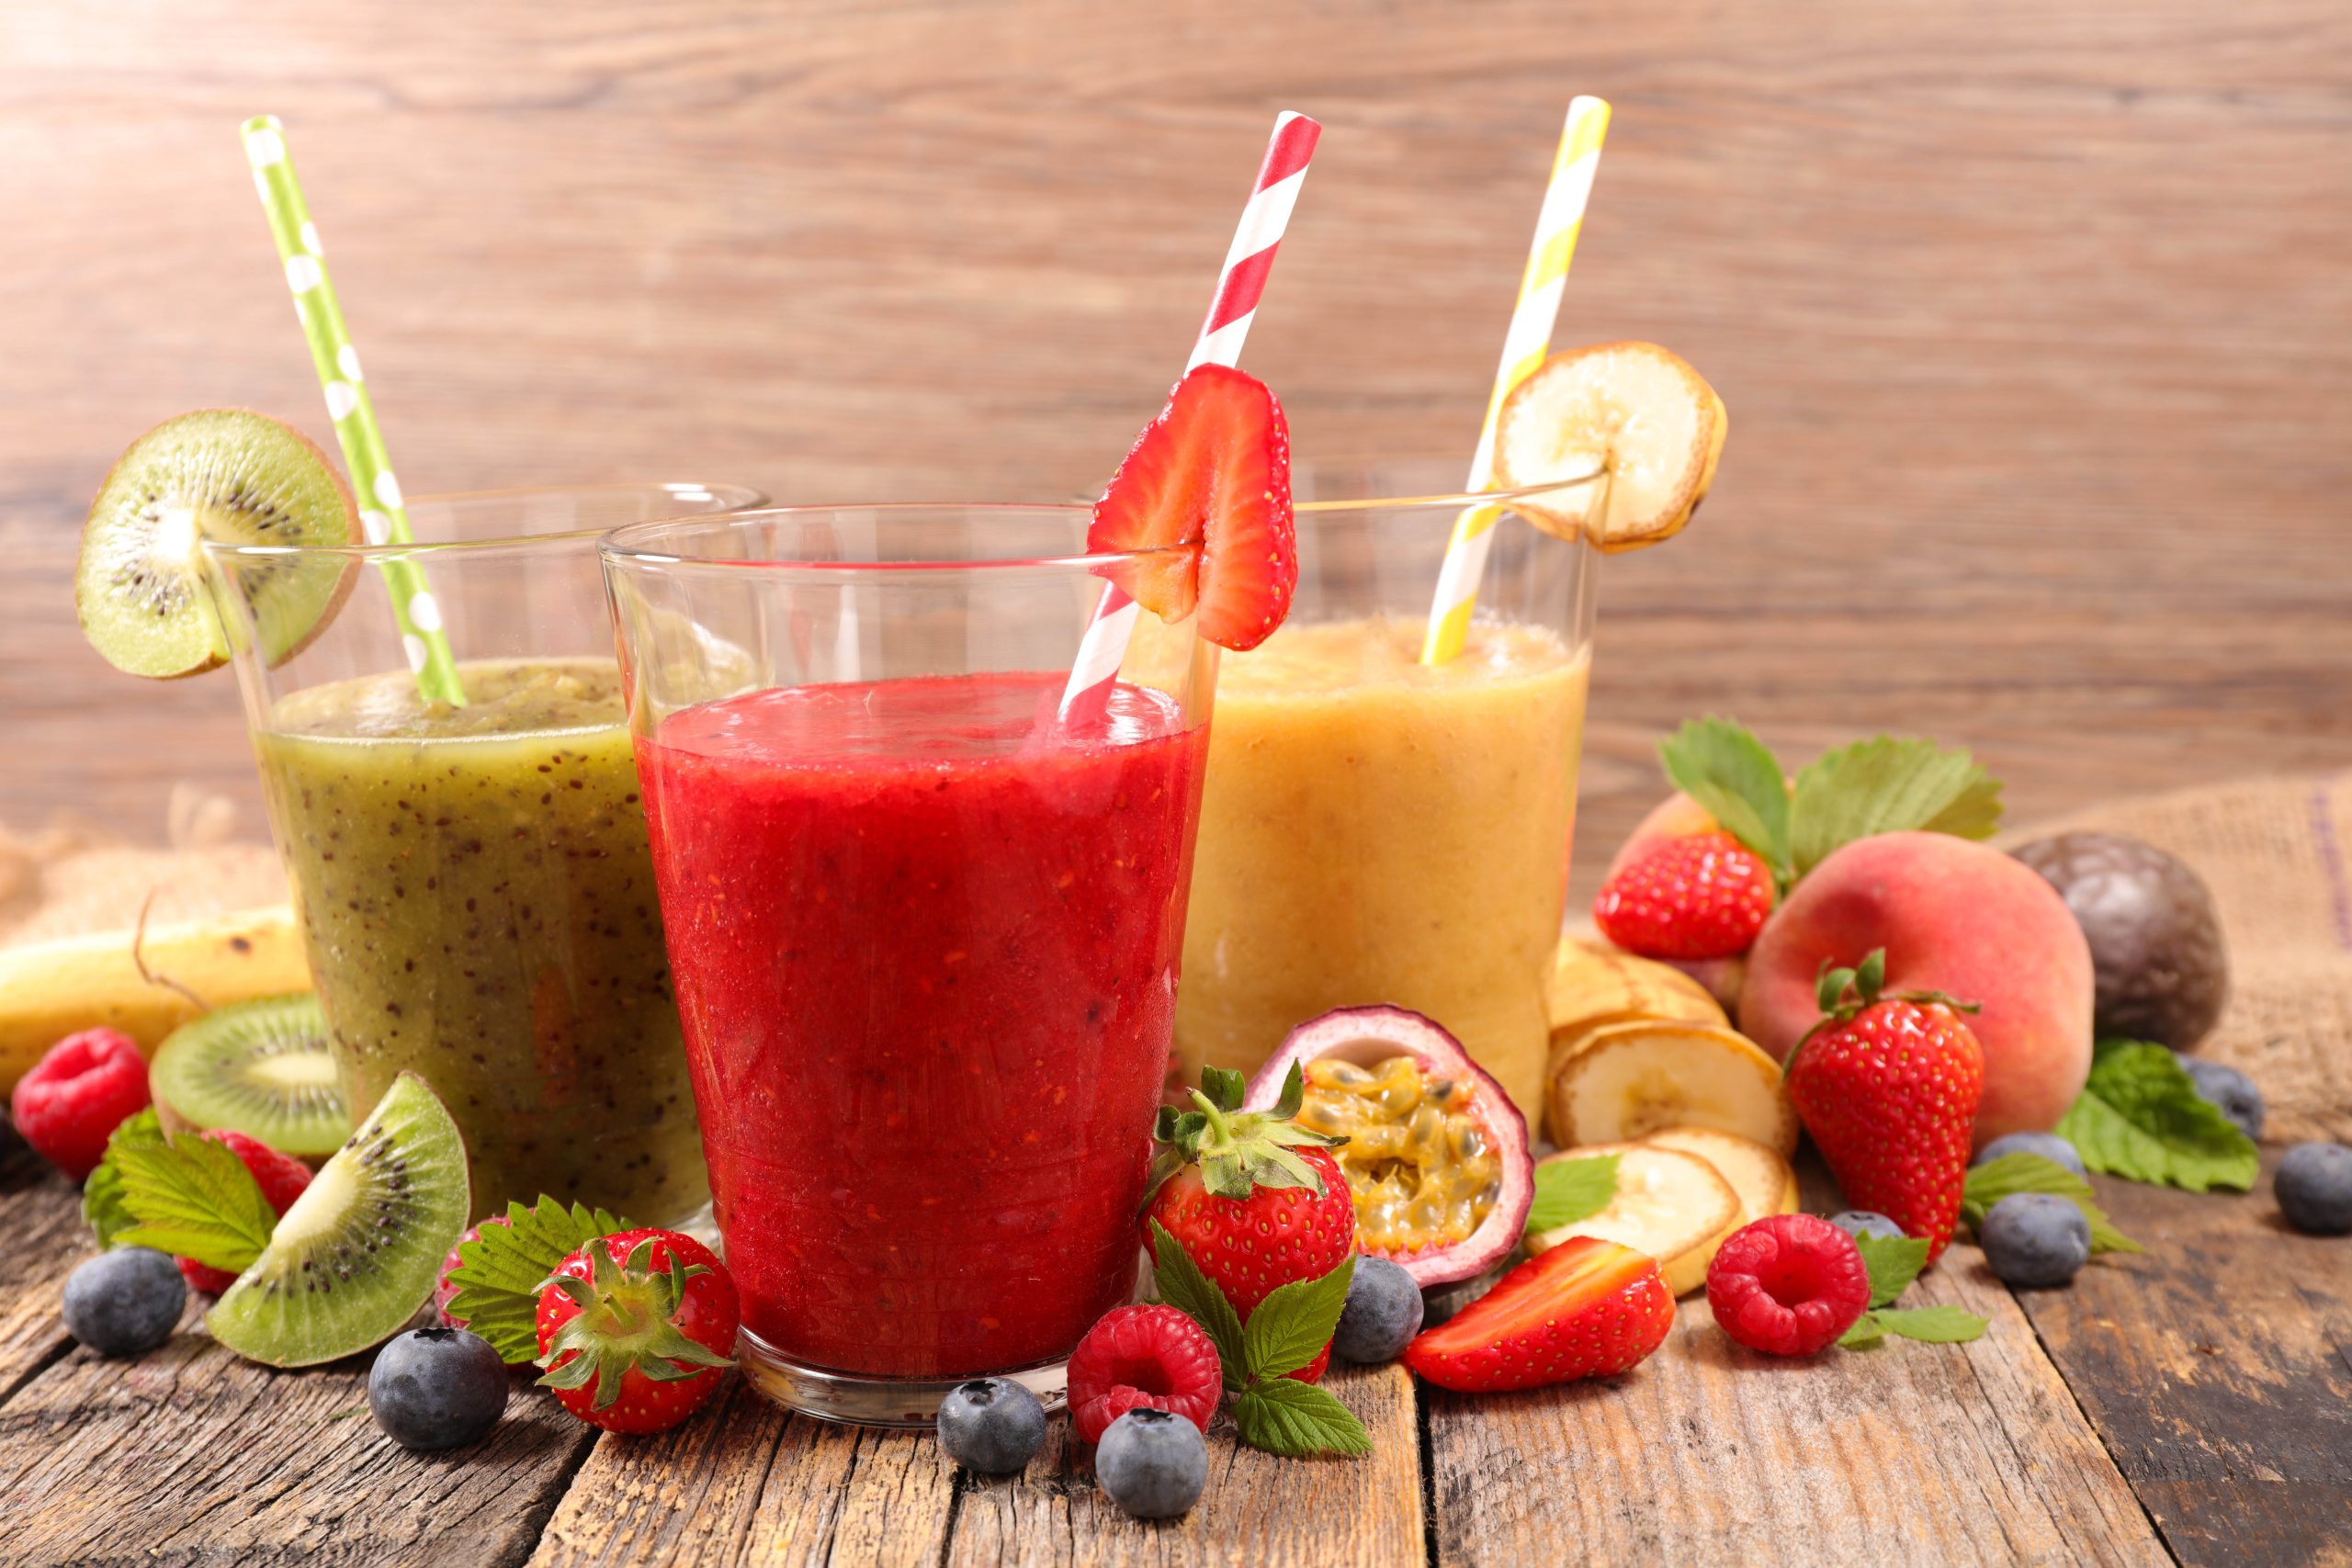 Three colorful smoothies in clear glasses, garnished with kiwi, strawberry, and banana, surrounded by an array of fresh fruits like strawberries, blueberries, raspberries, passion fruit, peach, and mint leaves on a wooden table.